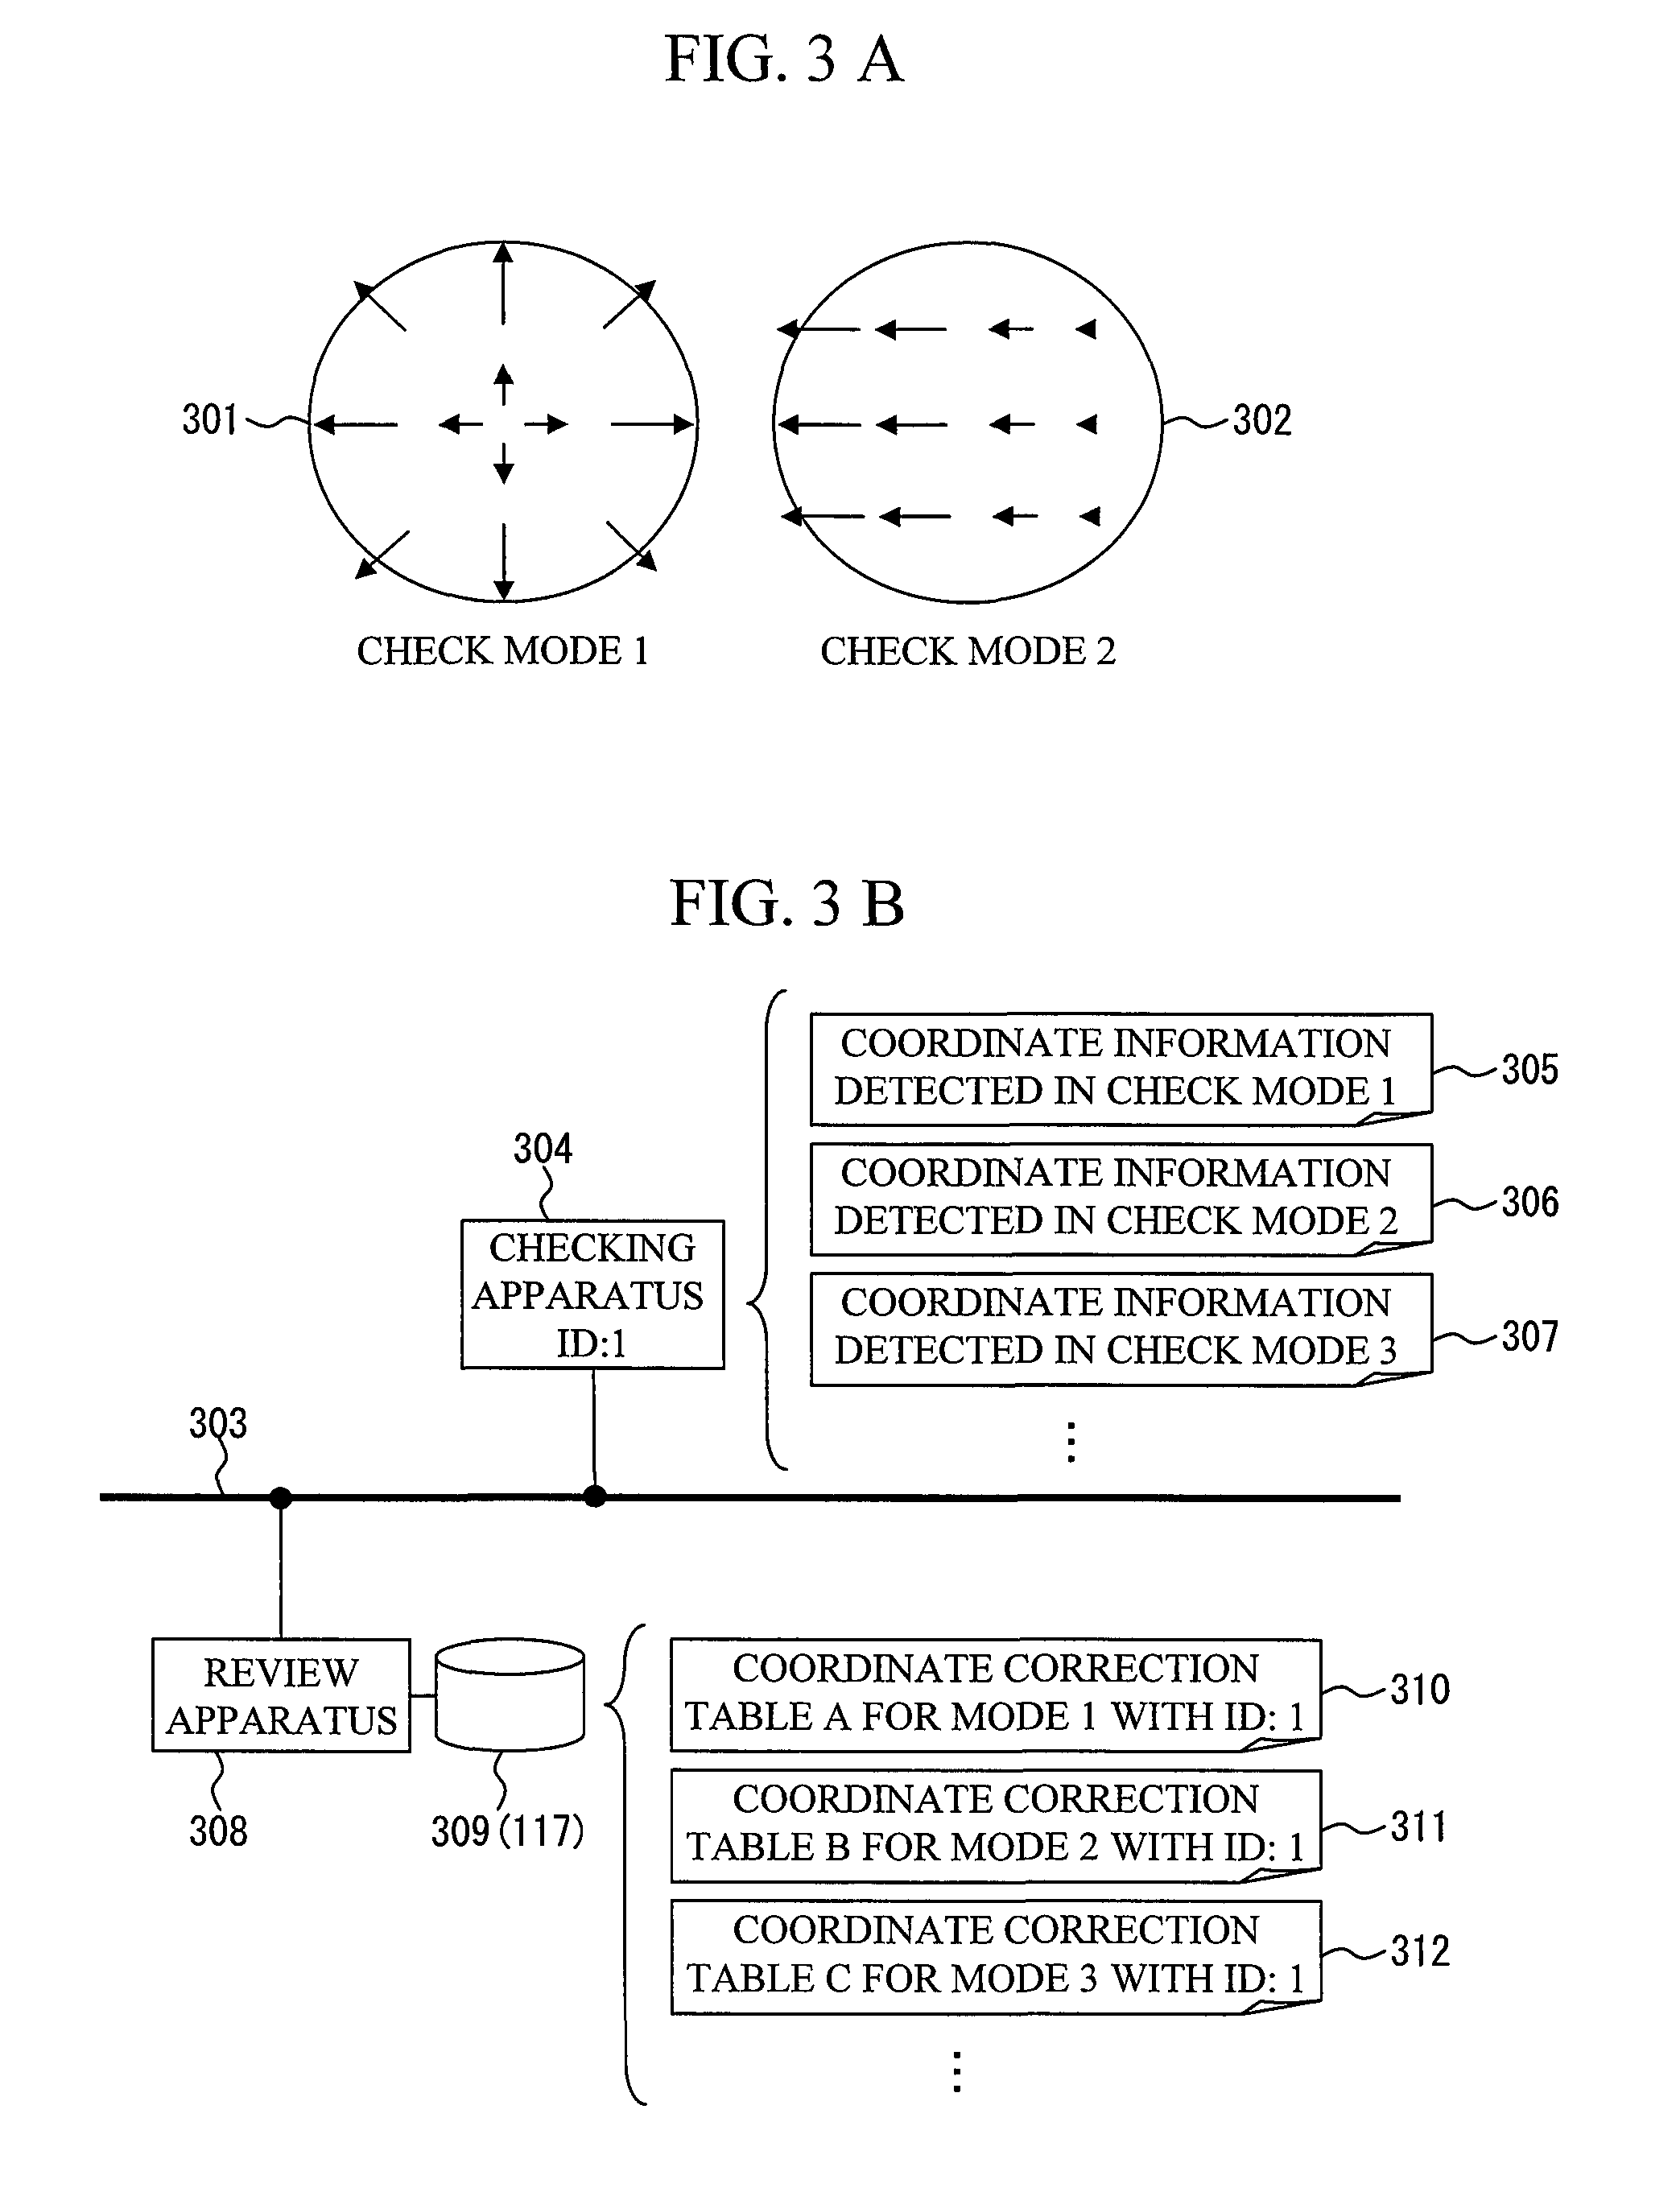 Method of correcting coordinates, and defect review apparatus